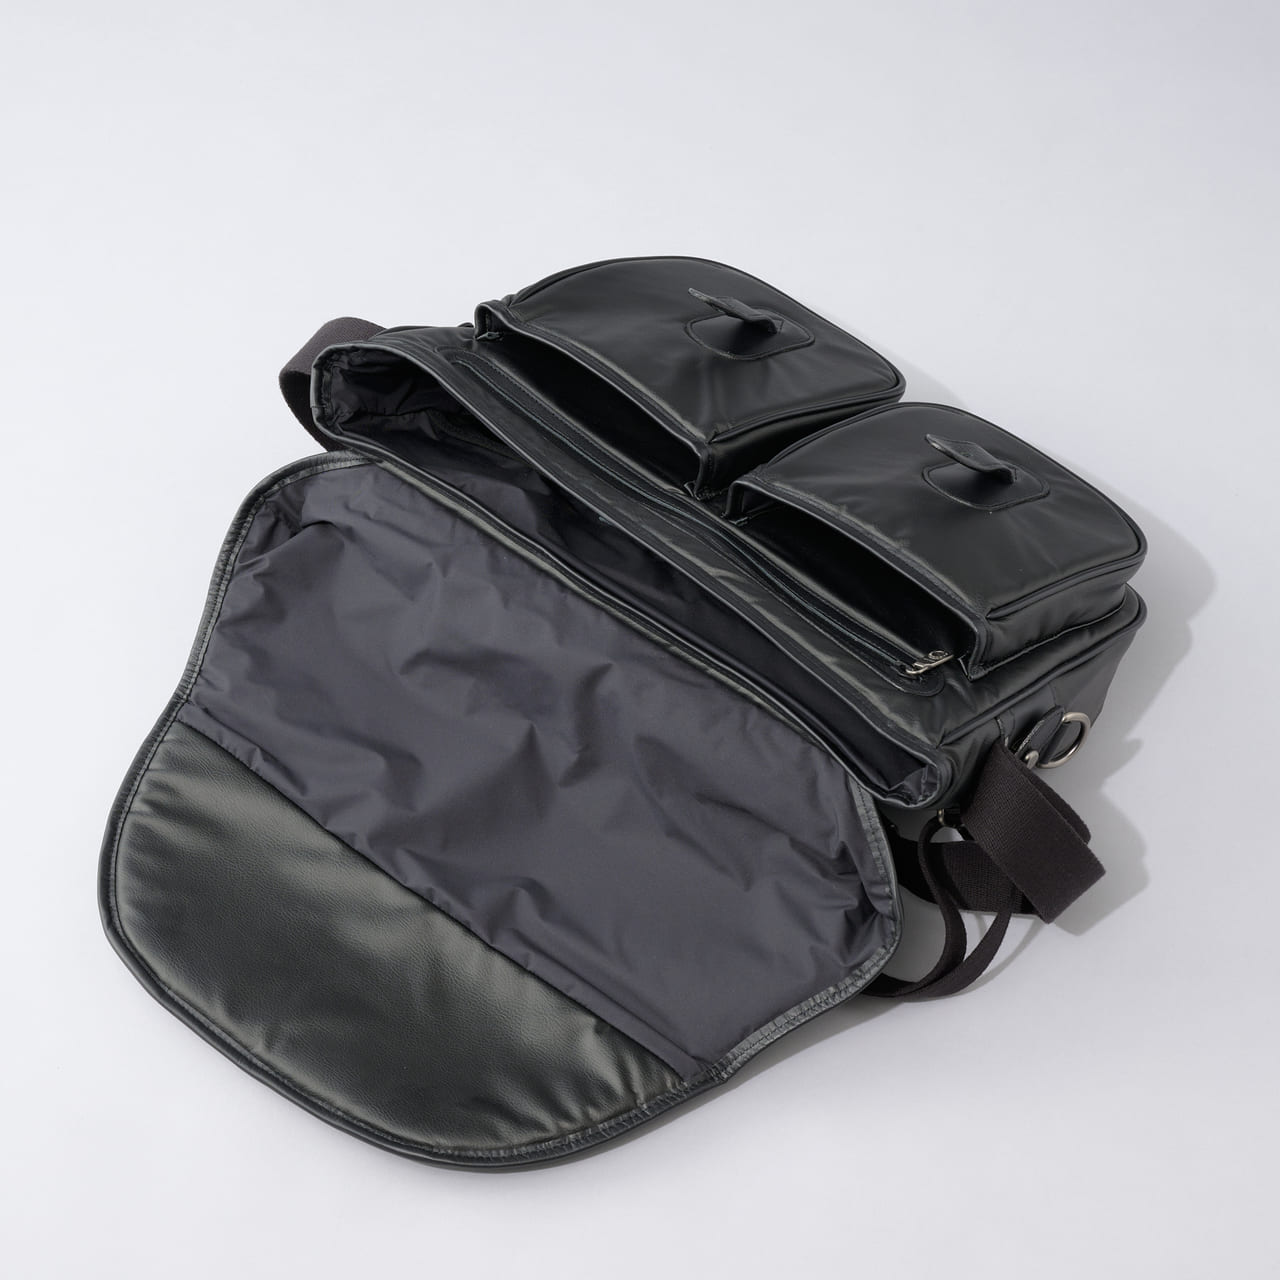 HUNTING WORLD CRAFTED BY DESCENTE.LAB　“CARRYALL MEDIUM”　黒い防水バッグ　メインコンパートメント